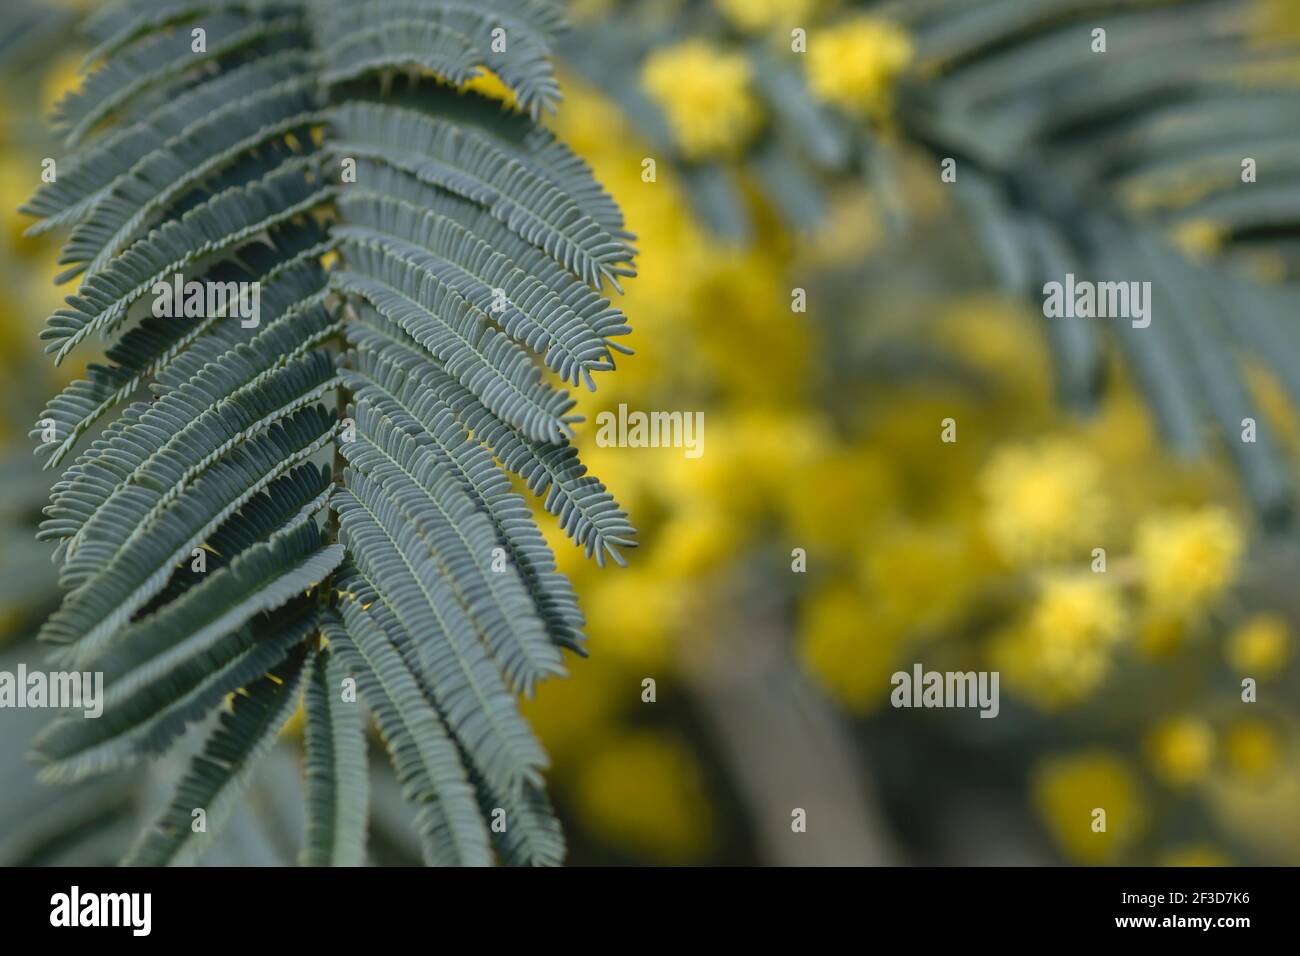 Acacia dealbata sylvery blue-green leaf close up, abstract background, copy space Stock Photo